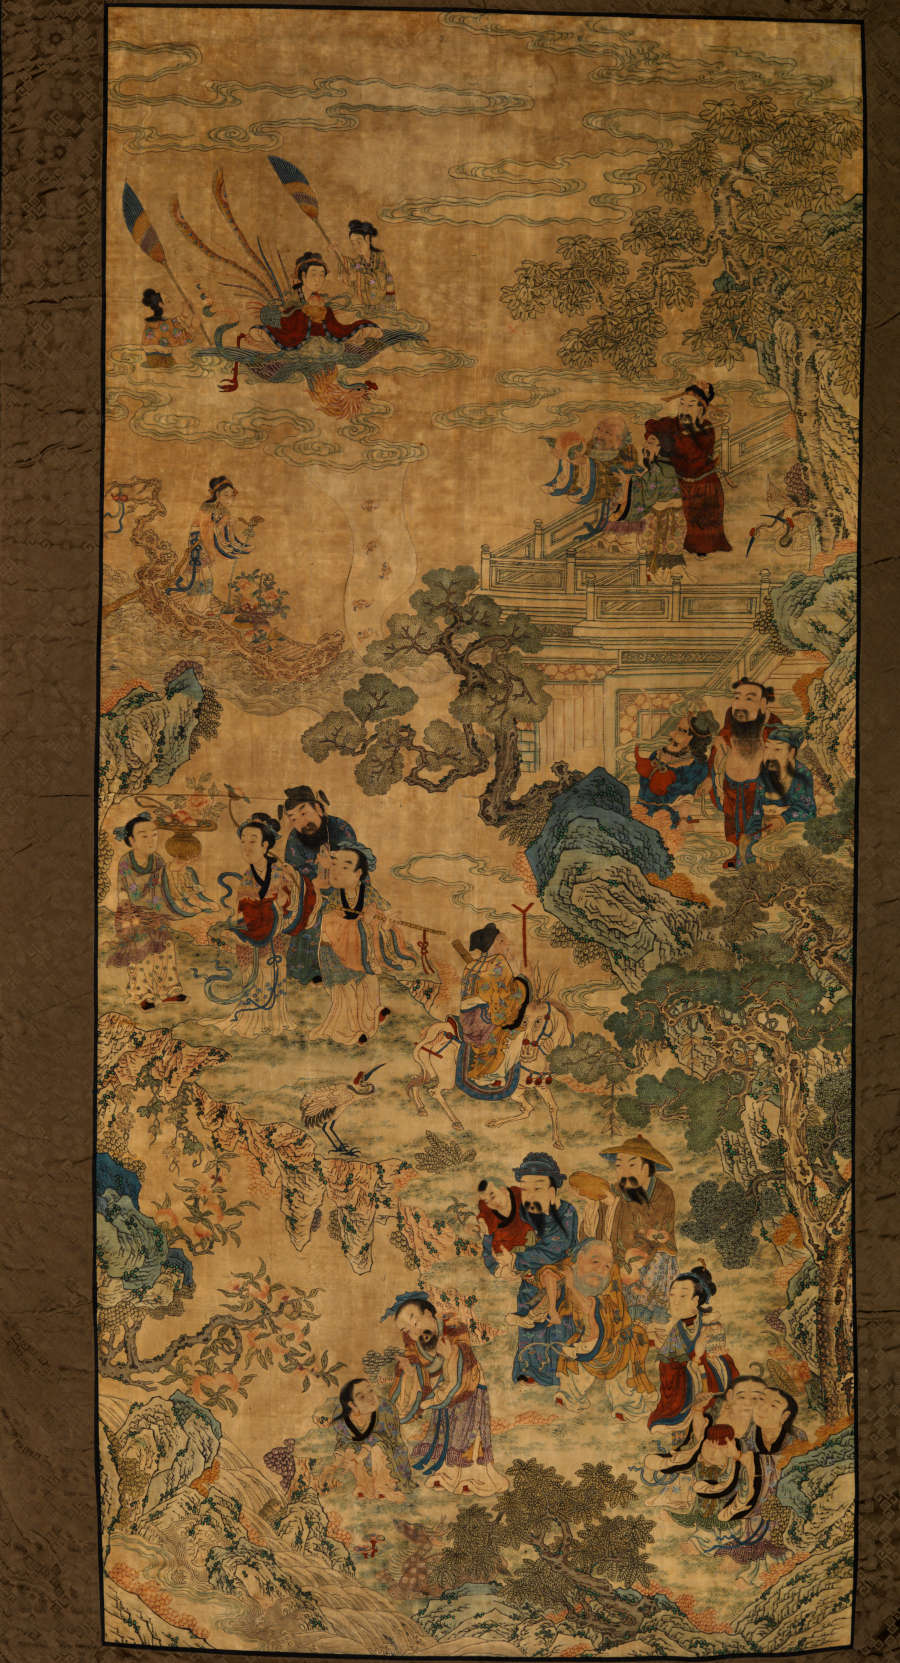 Vertically long rectangular scroll with a thick brown border. It features an illustration of several people engaging with another amongst trees, houses, and in boats on water.